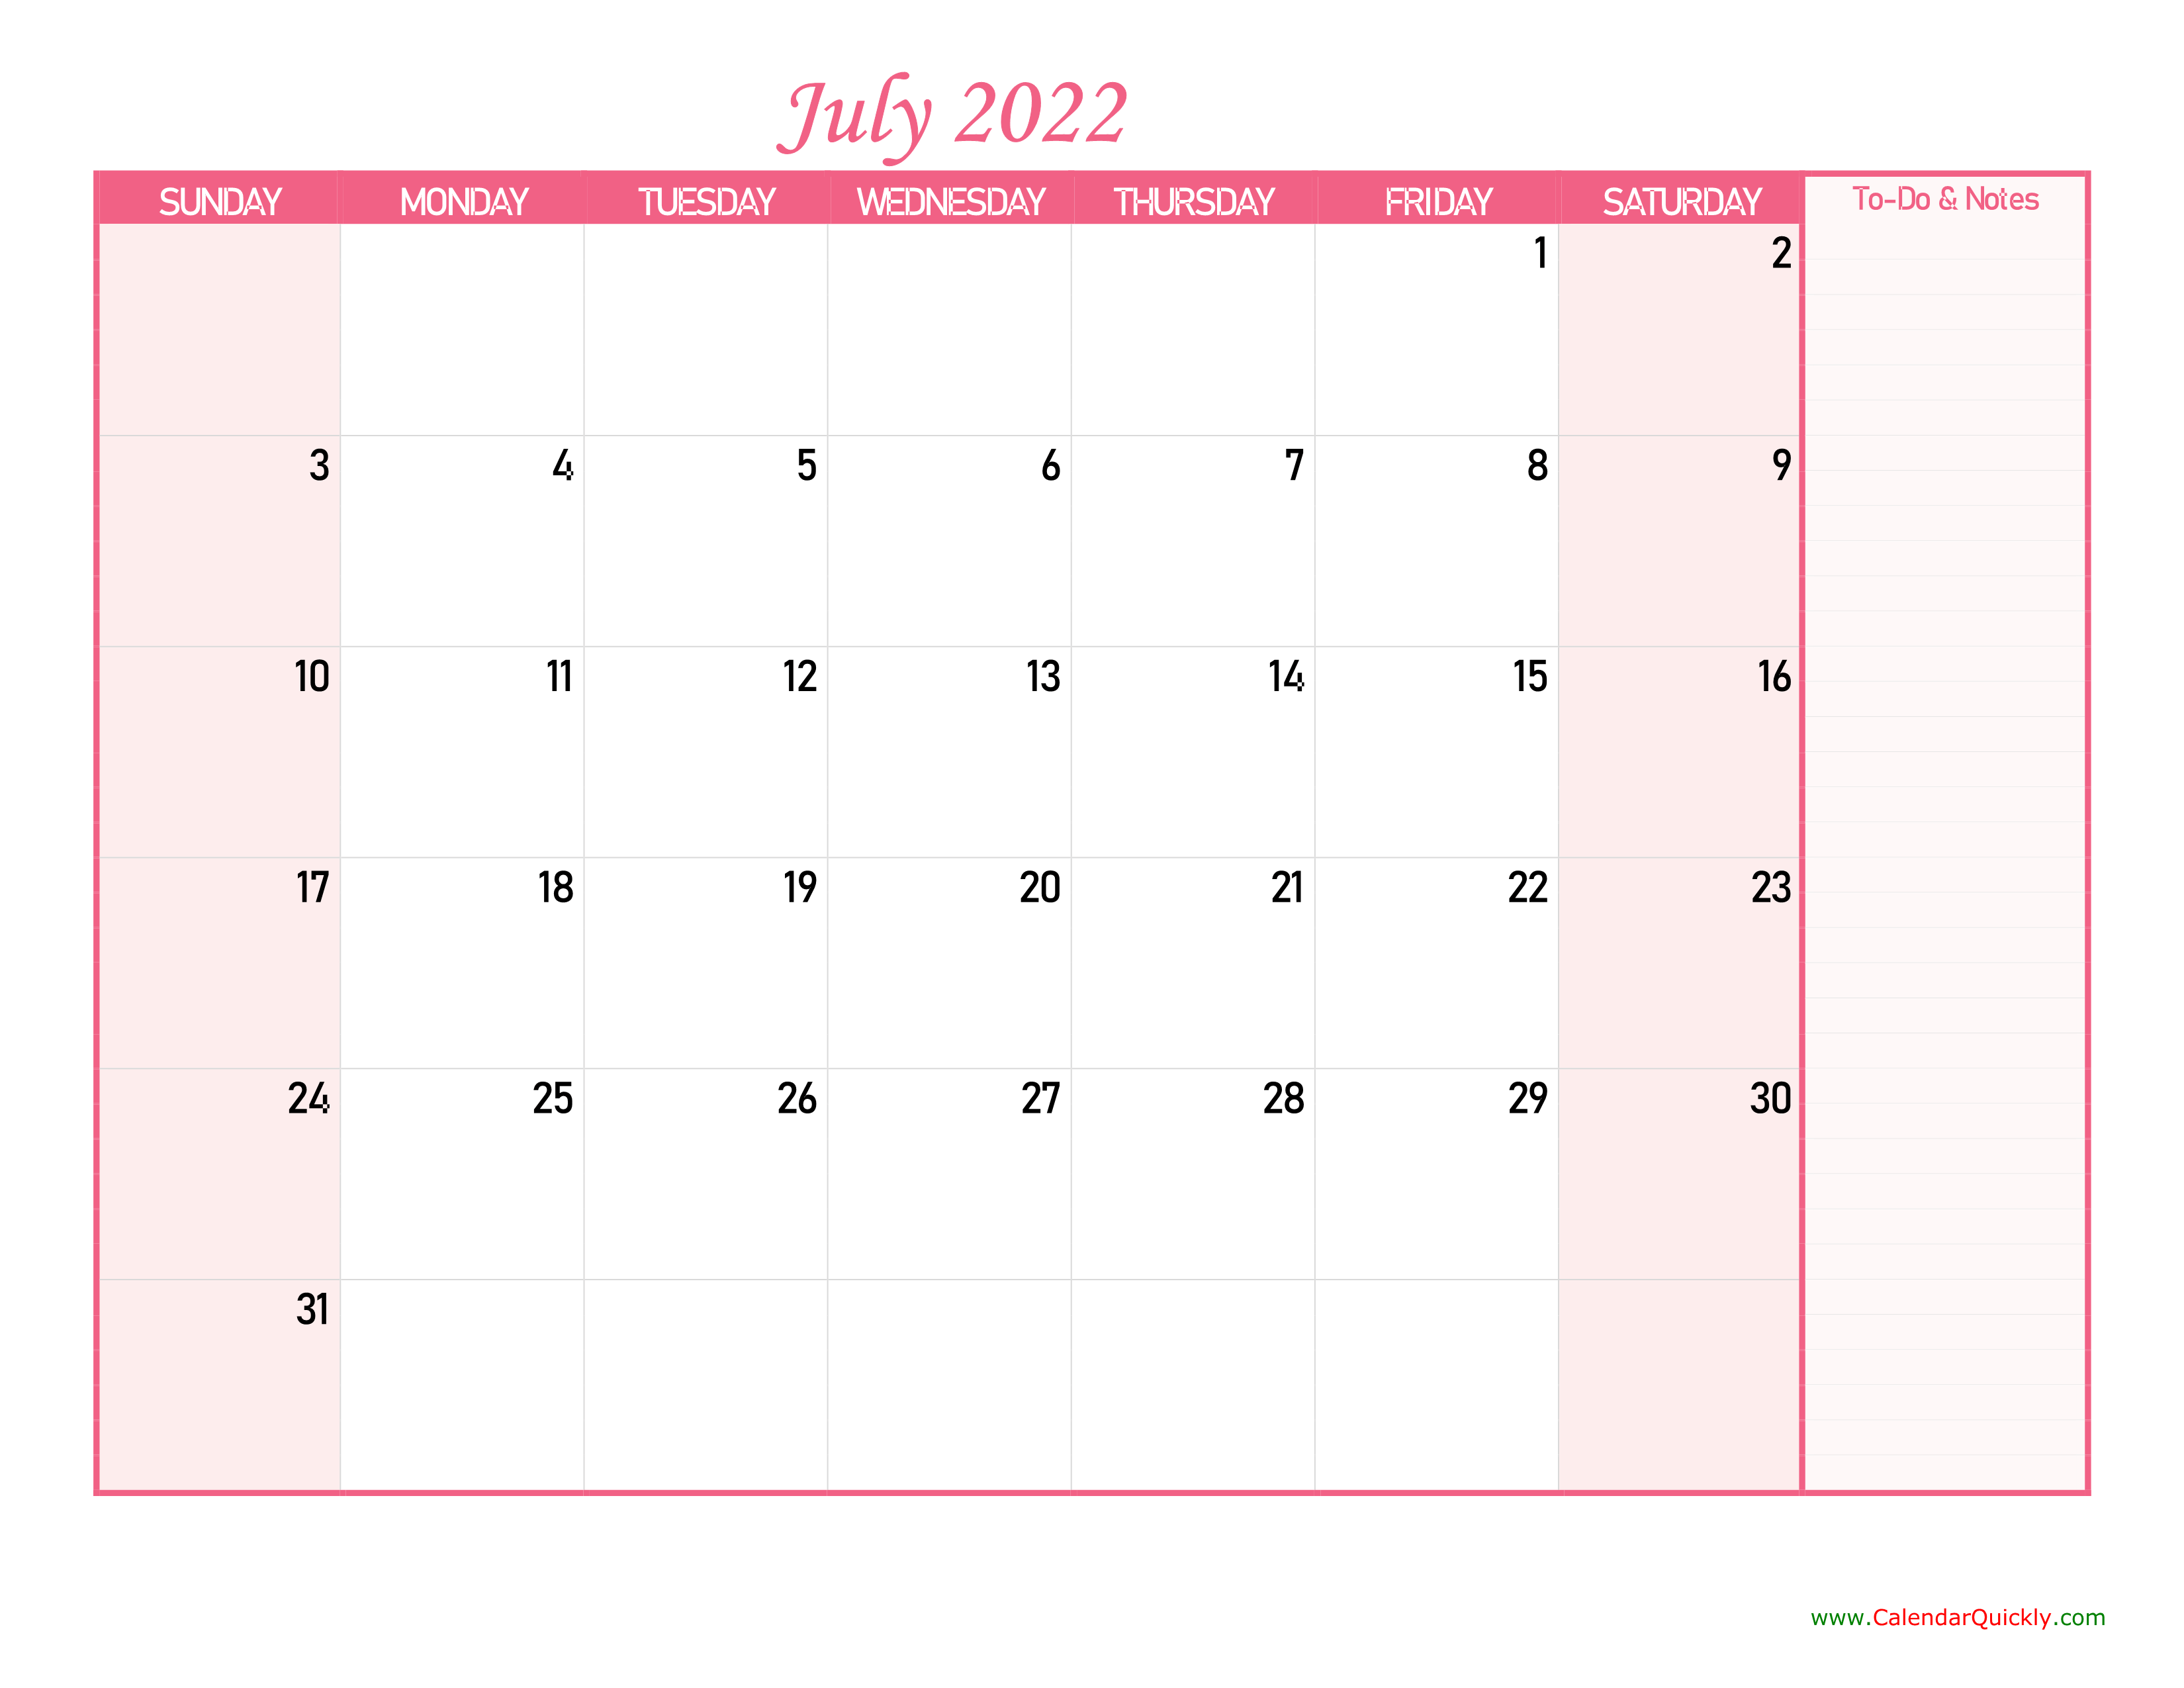 July Calendar 2022 With Notes Calendar Quickly